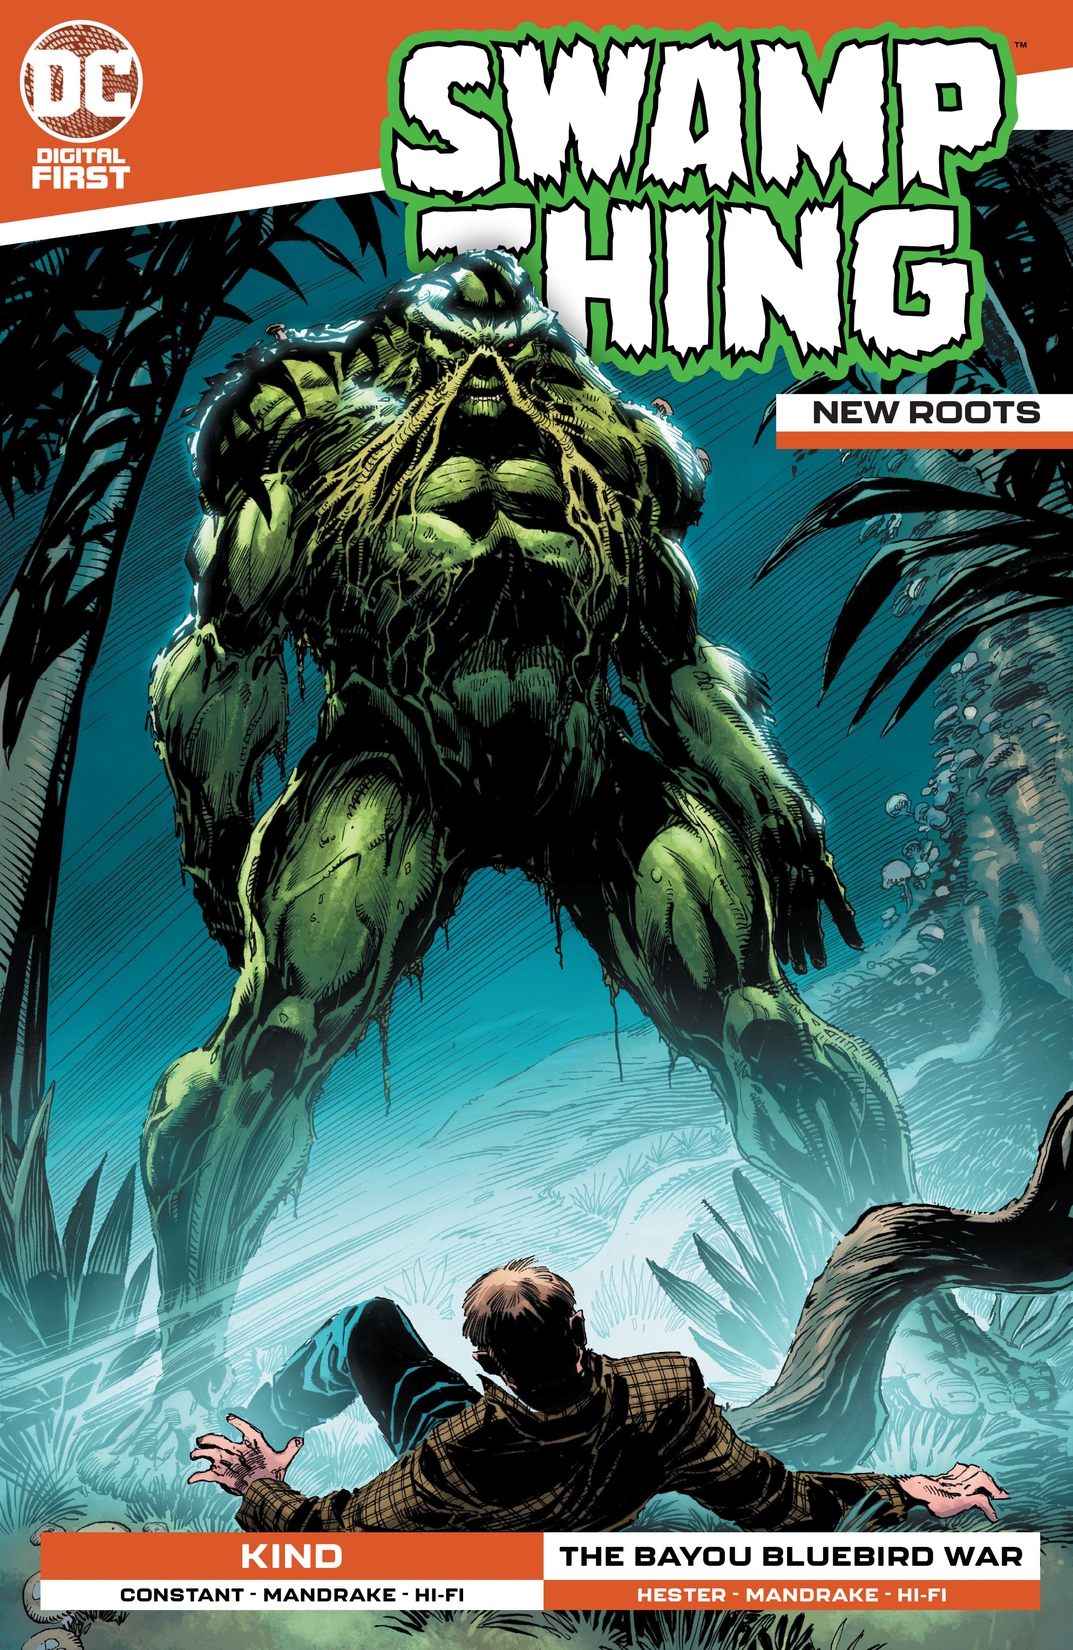 Swamp Thing: New Roots #9 preview images